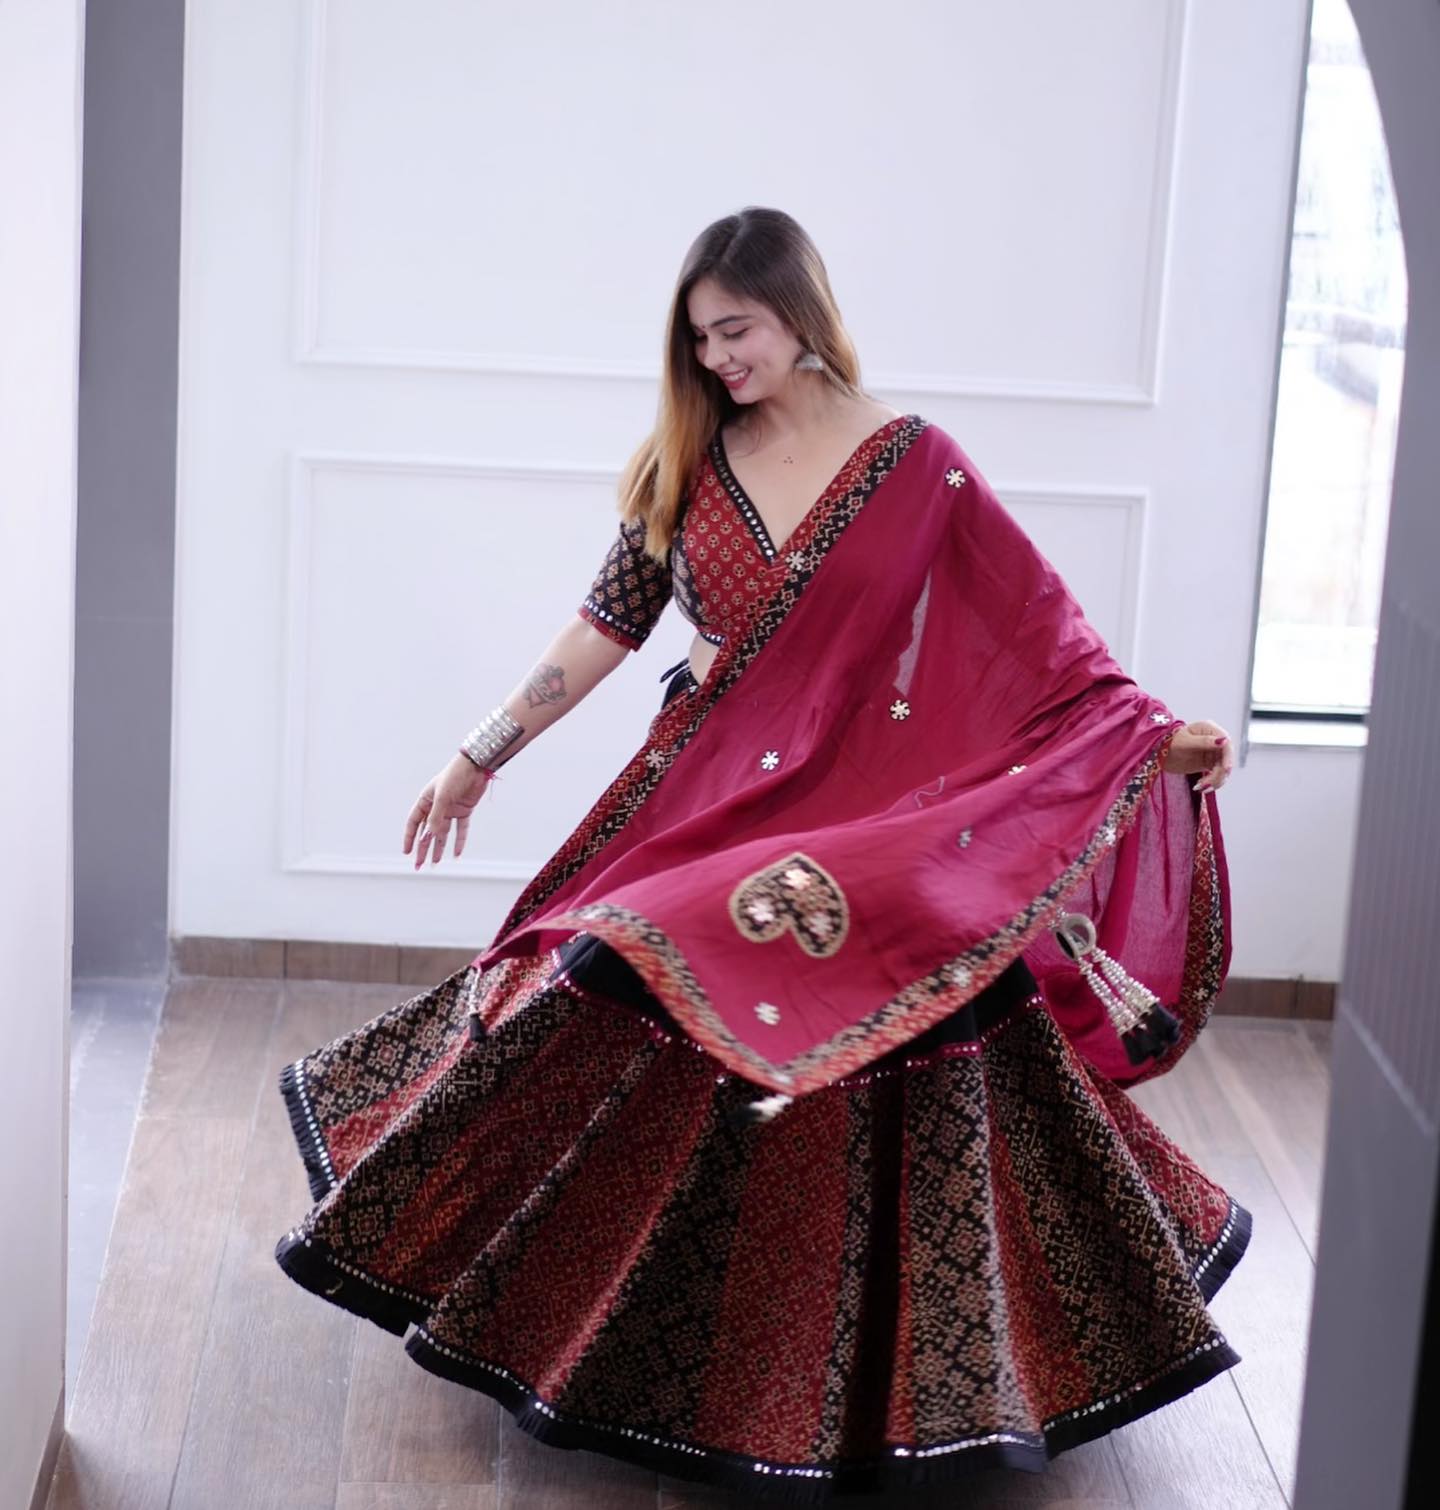 "Exquisite Digital Print Muslin Cotton Lehenga Choli with Real Mirror Work - Perfect for Garaba and Festive Celebrations | Limited Edition Ethnic Wear"